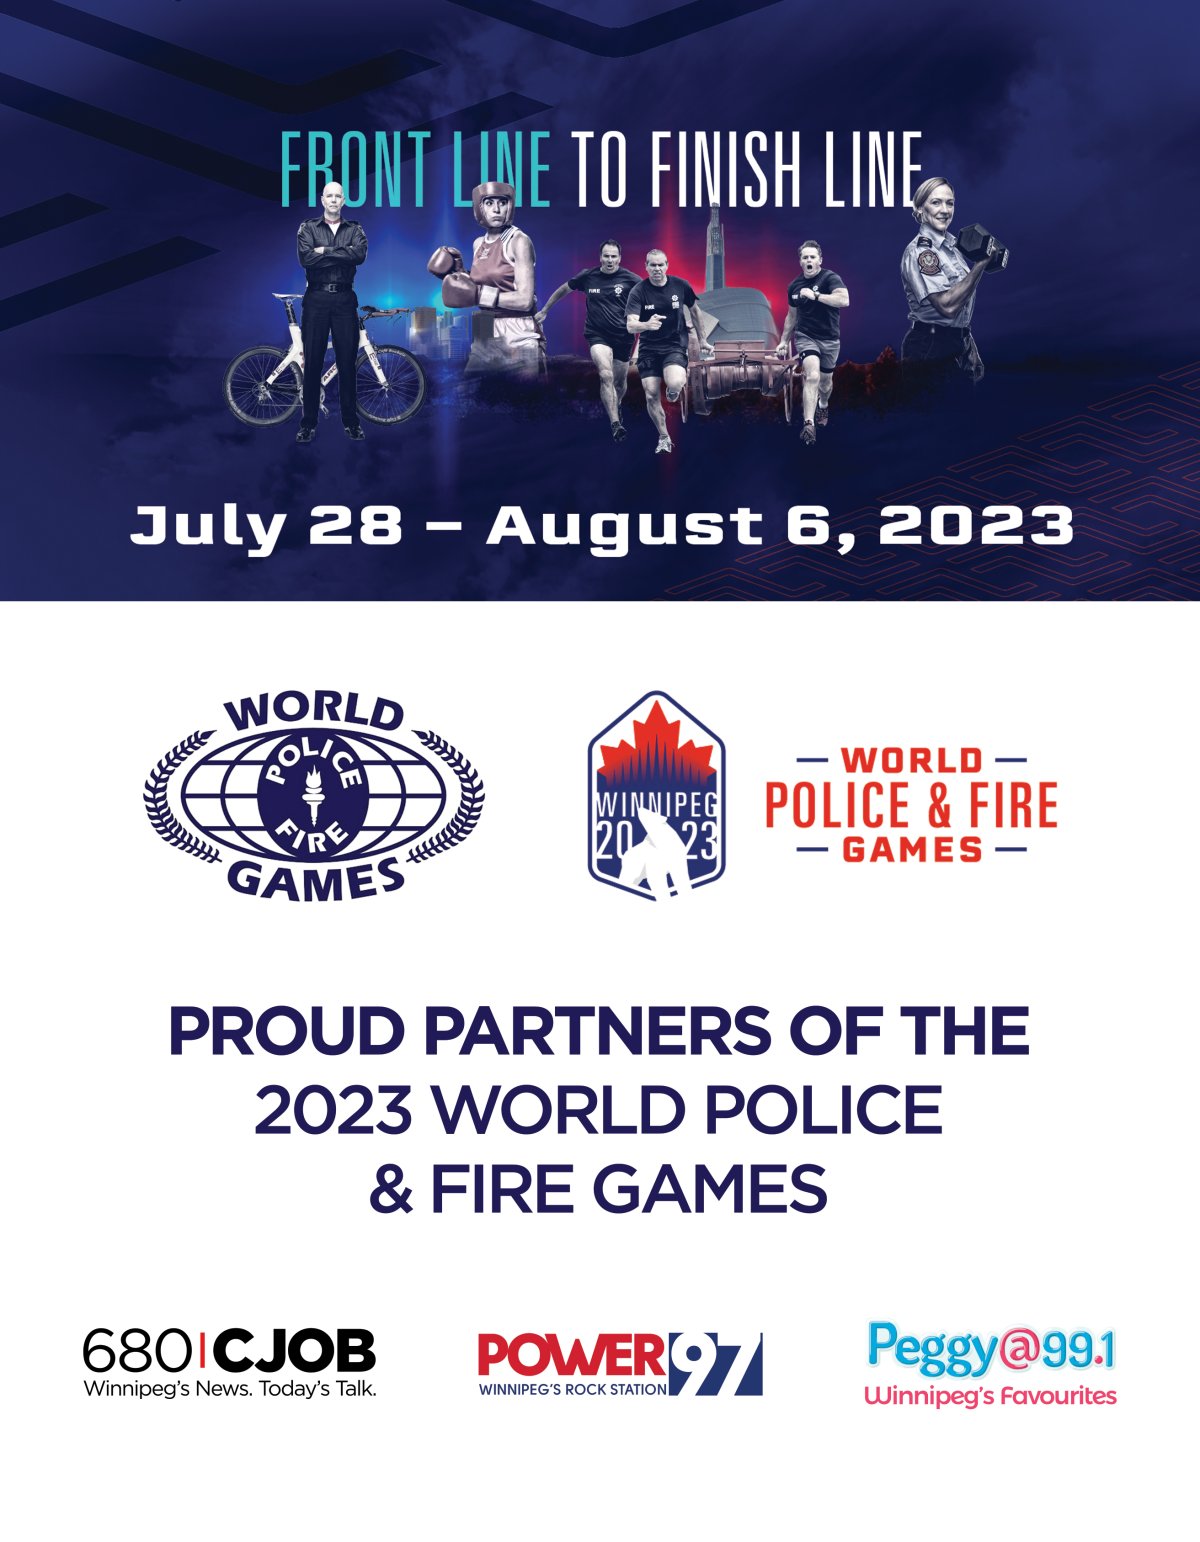 World Police & Fire Games - image